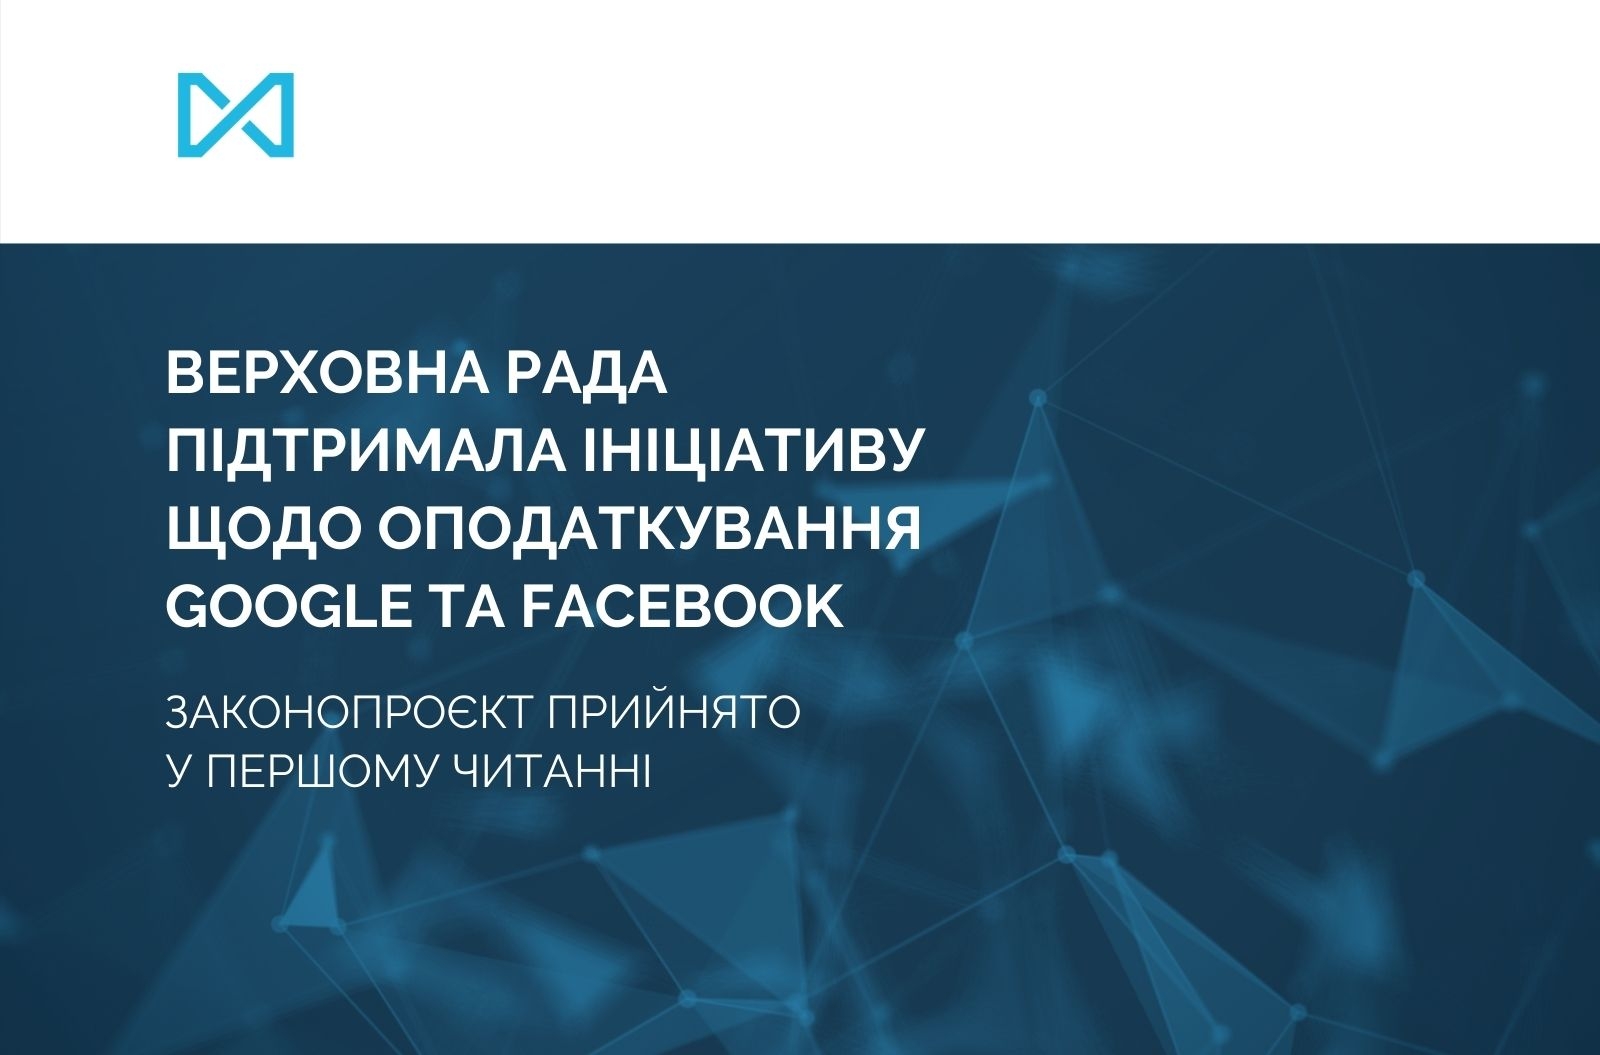 Ukrainian Parliament supported the initiative on taxation of Google and Facebook: the draft law was adopted in the first reading